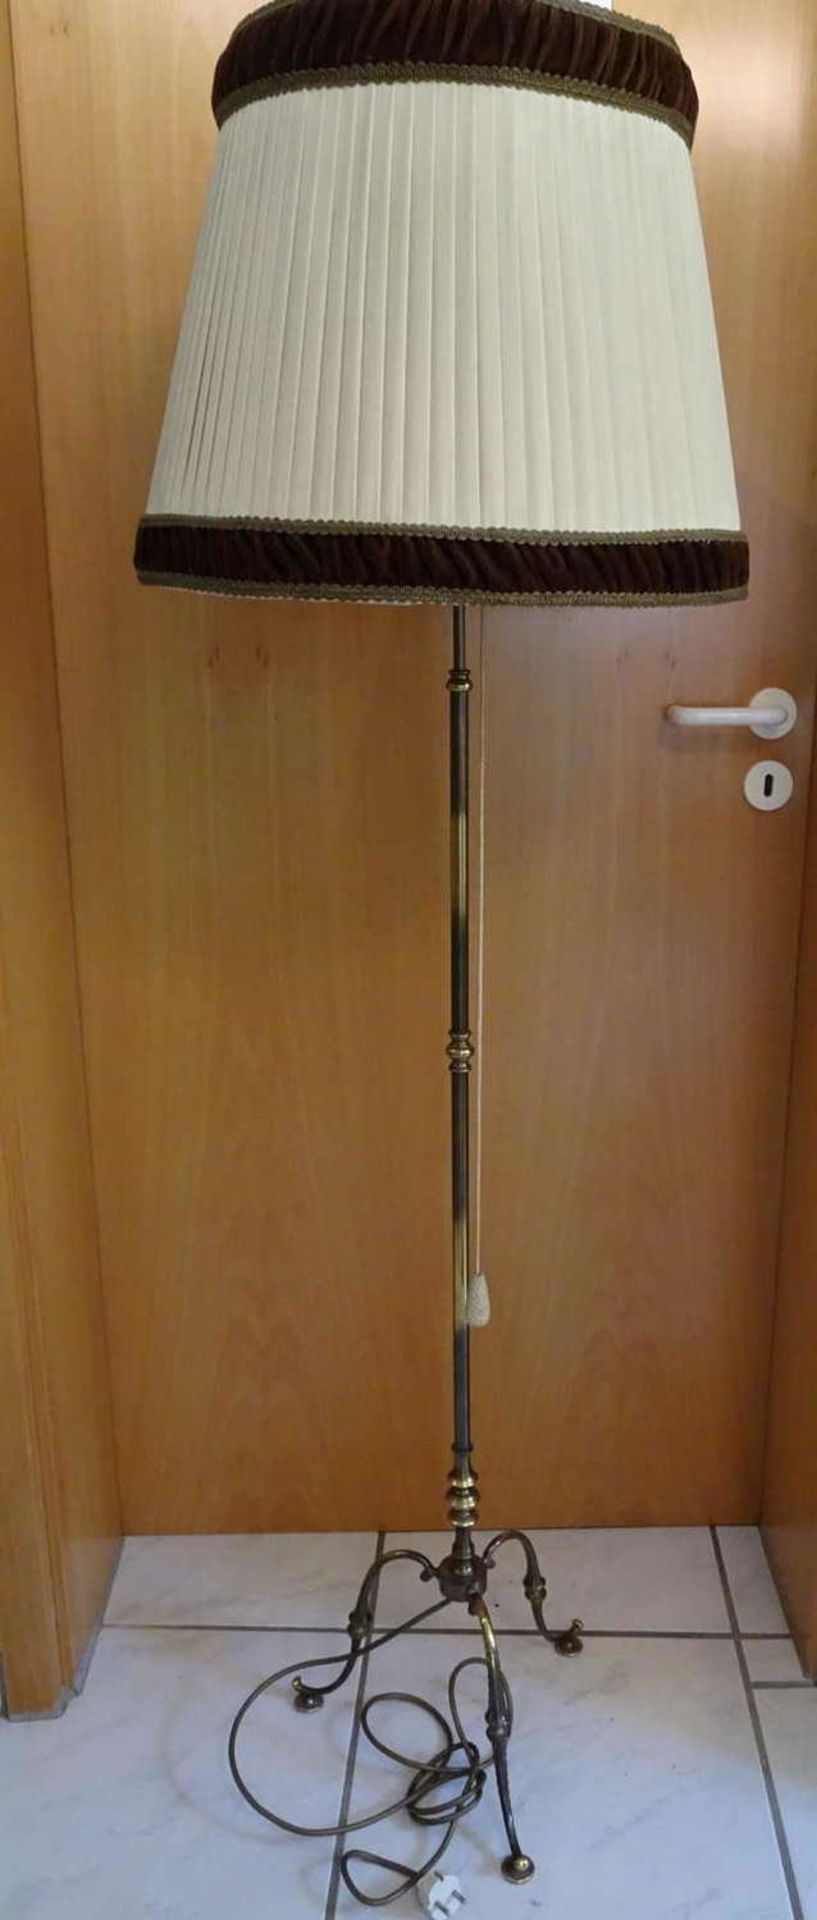 1 brass floor lamp, function tested, with pull mechanism. Height about 1.60 cmCOLLECTION - NO S